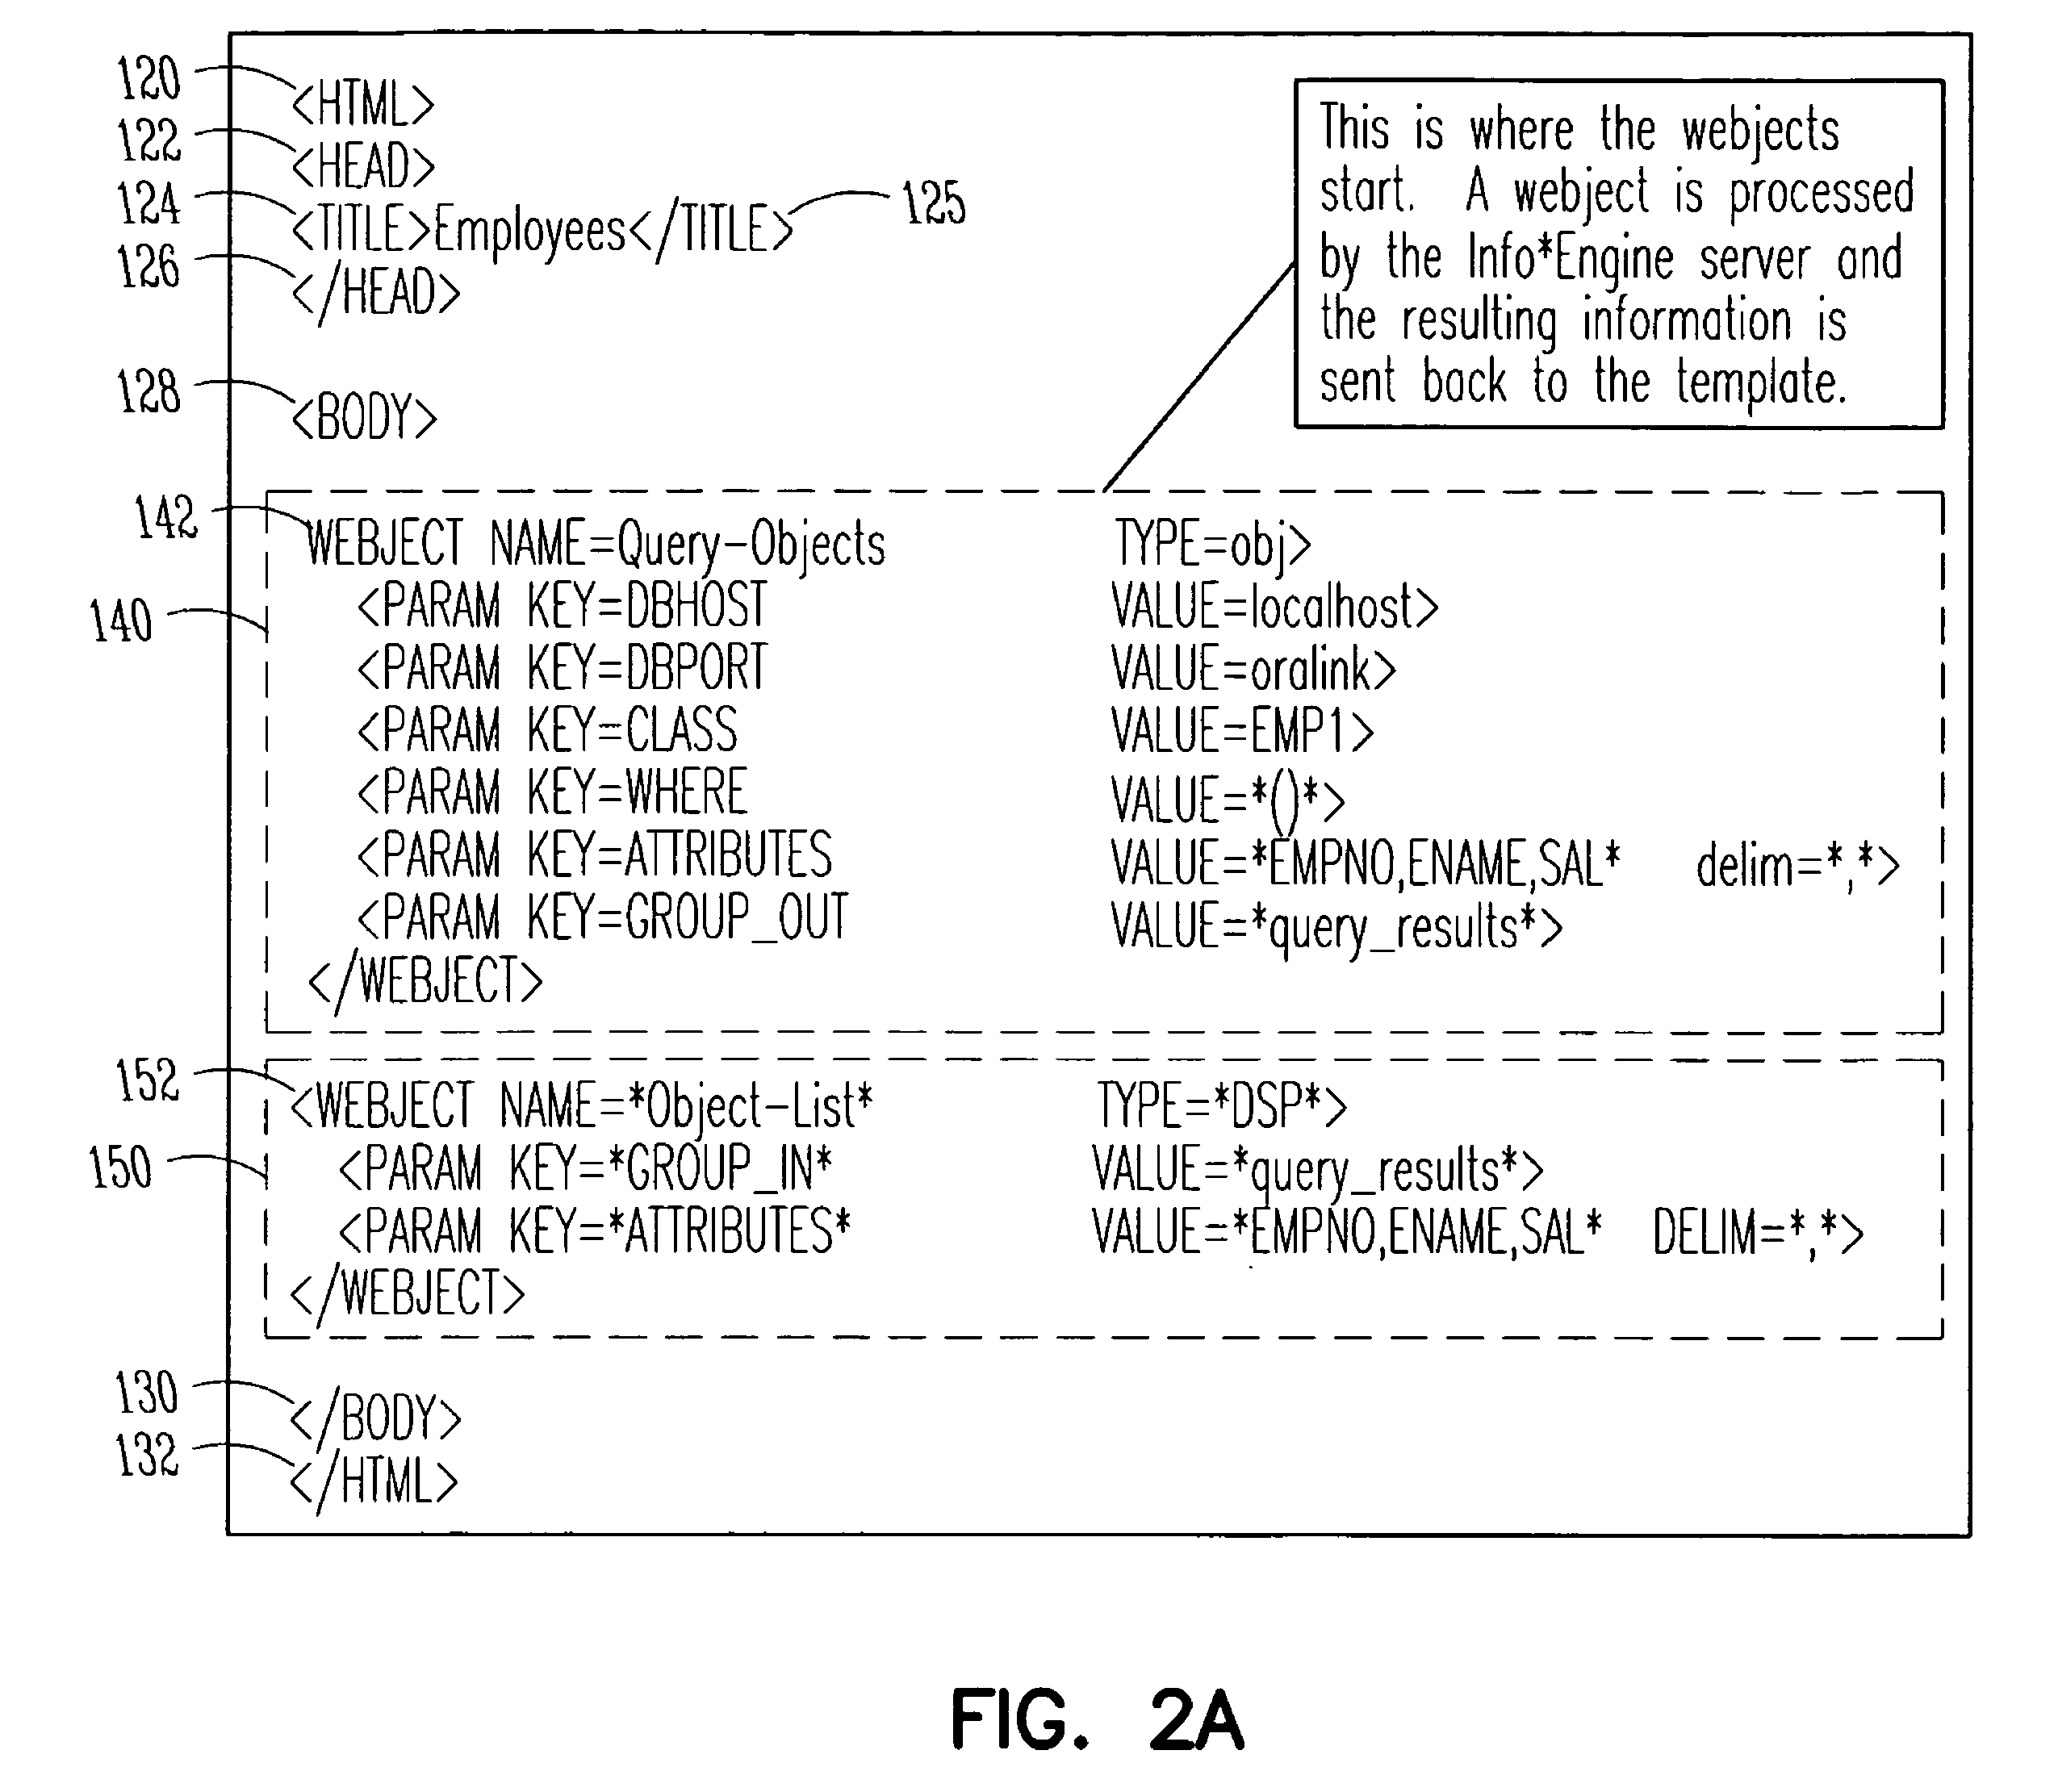 Federation of information from multiple data sources into a common, role-based distribution model